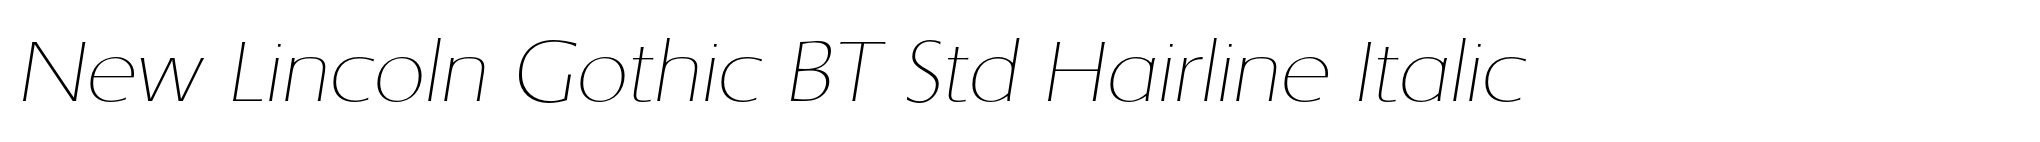 New Lincoln Gothic BT Std Hairline Italic image